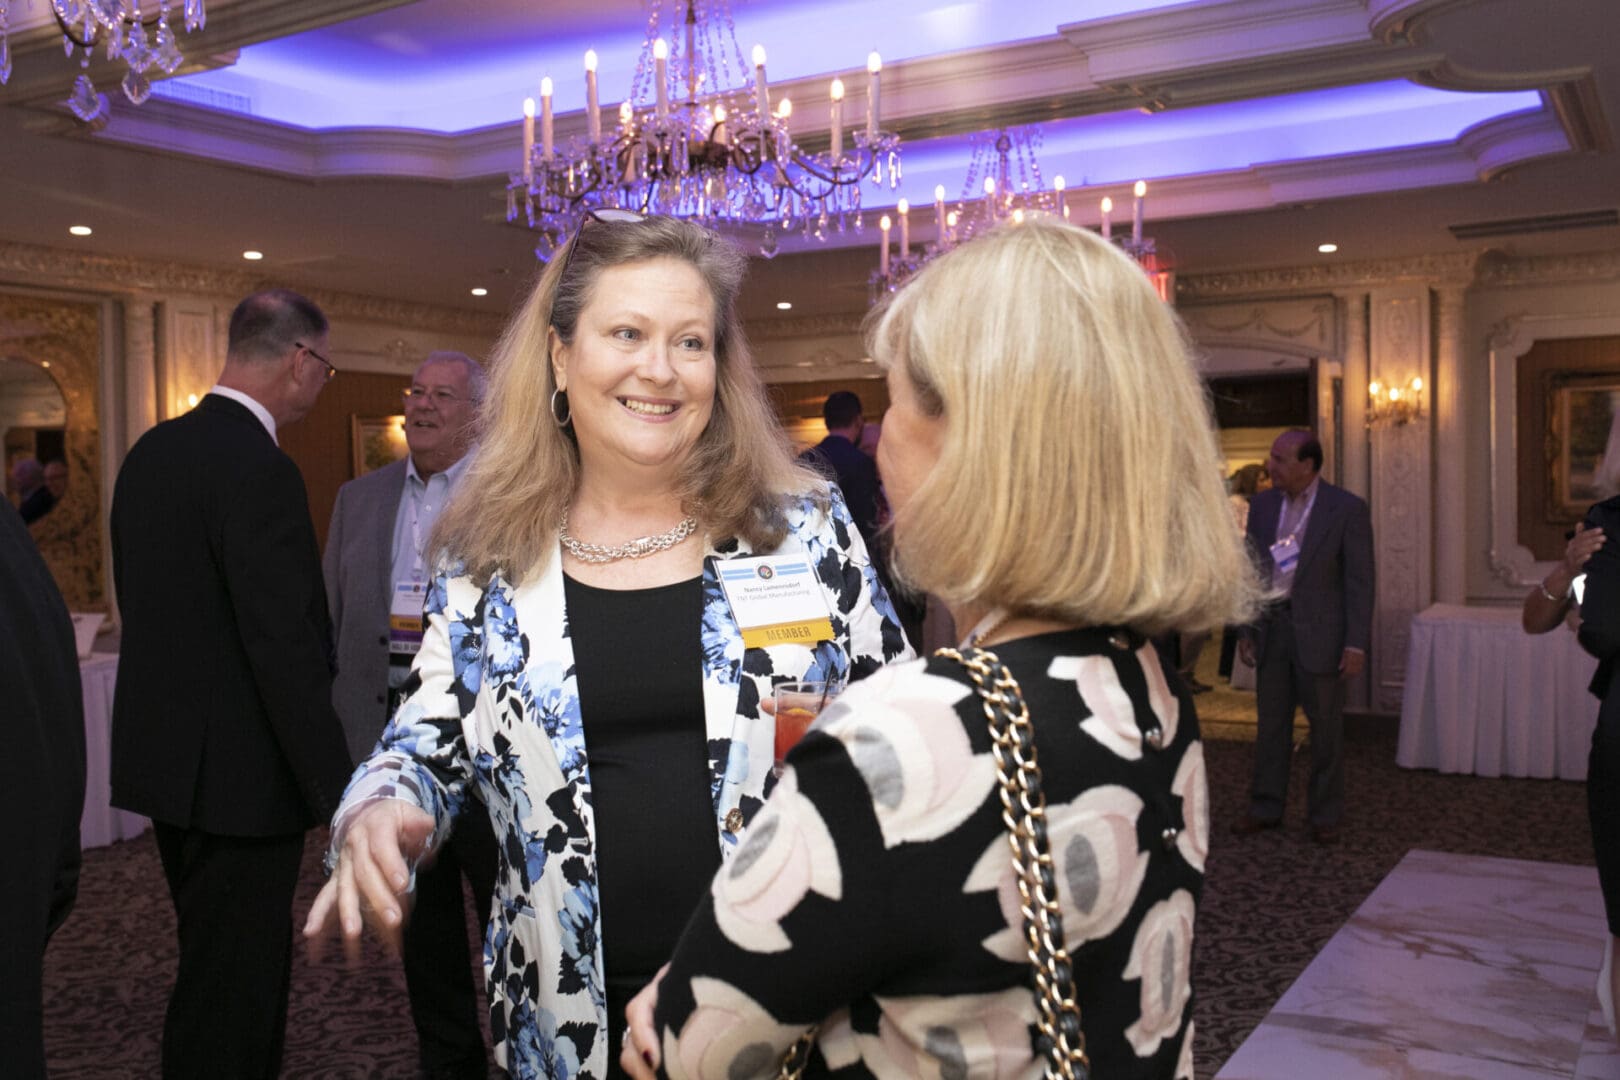 Two women talking to each other at a business event.